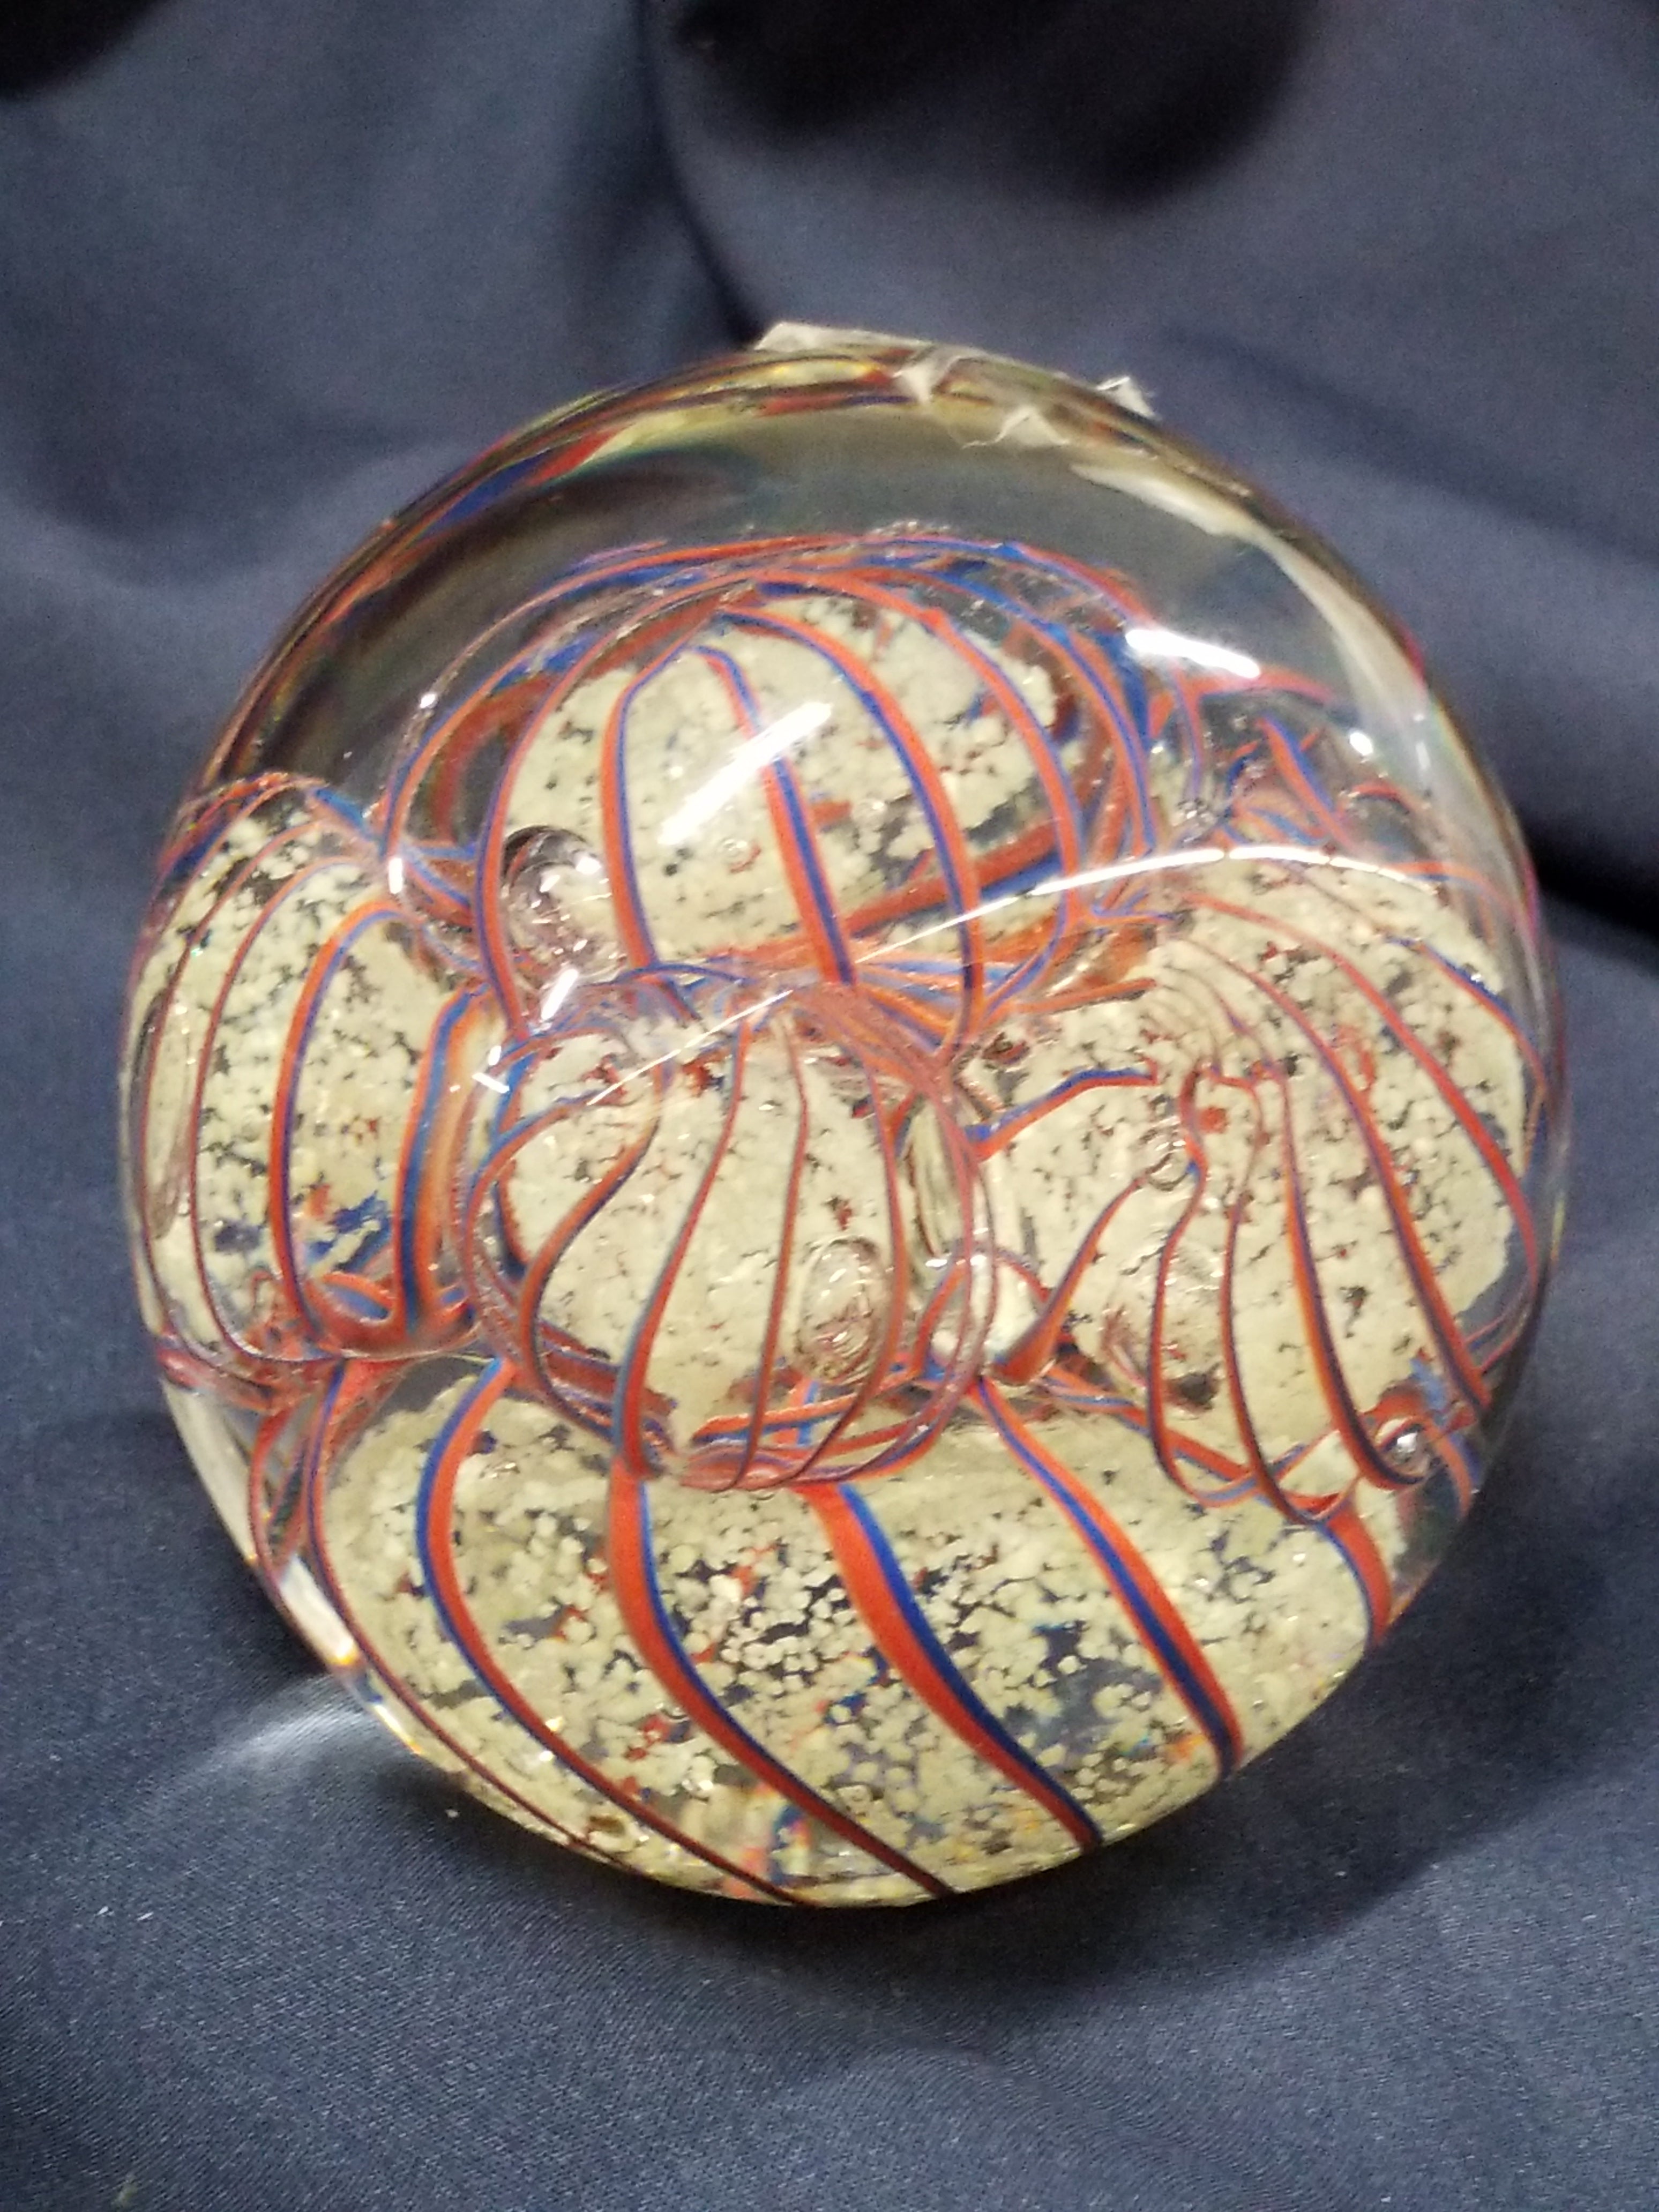 Glass Paperweight - Glow in the Dark